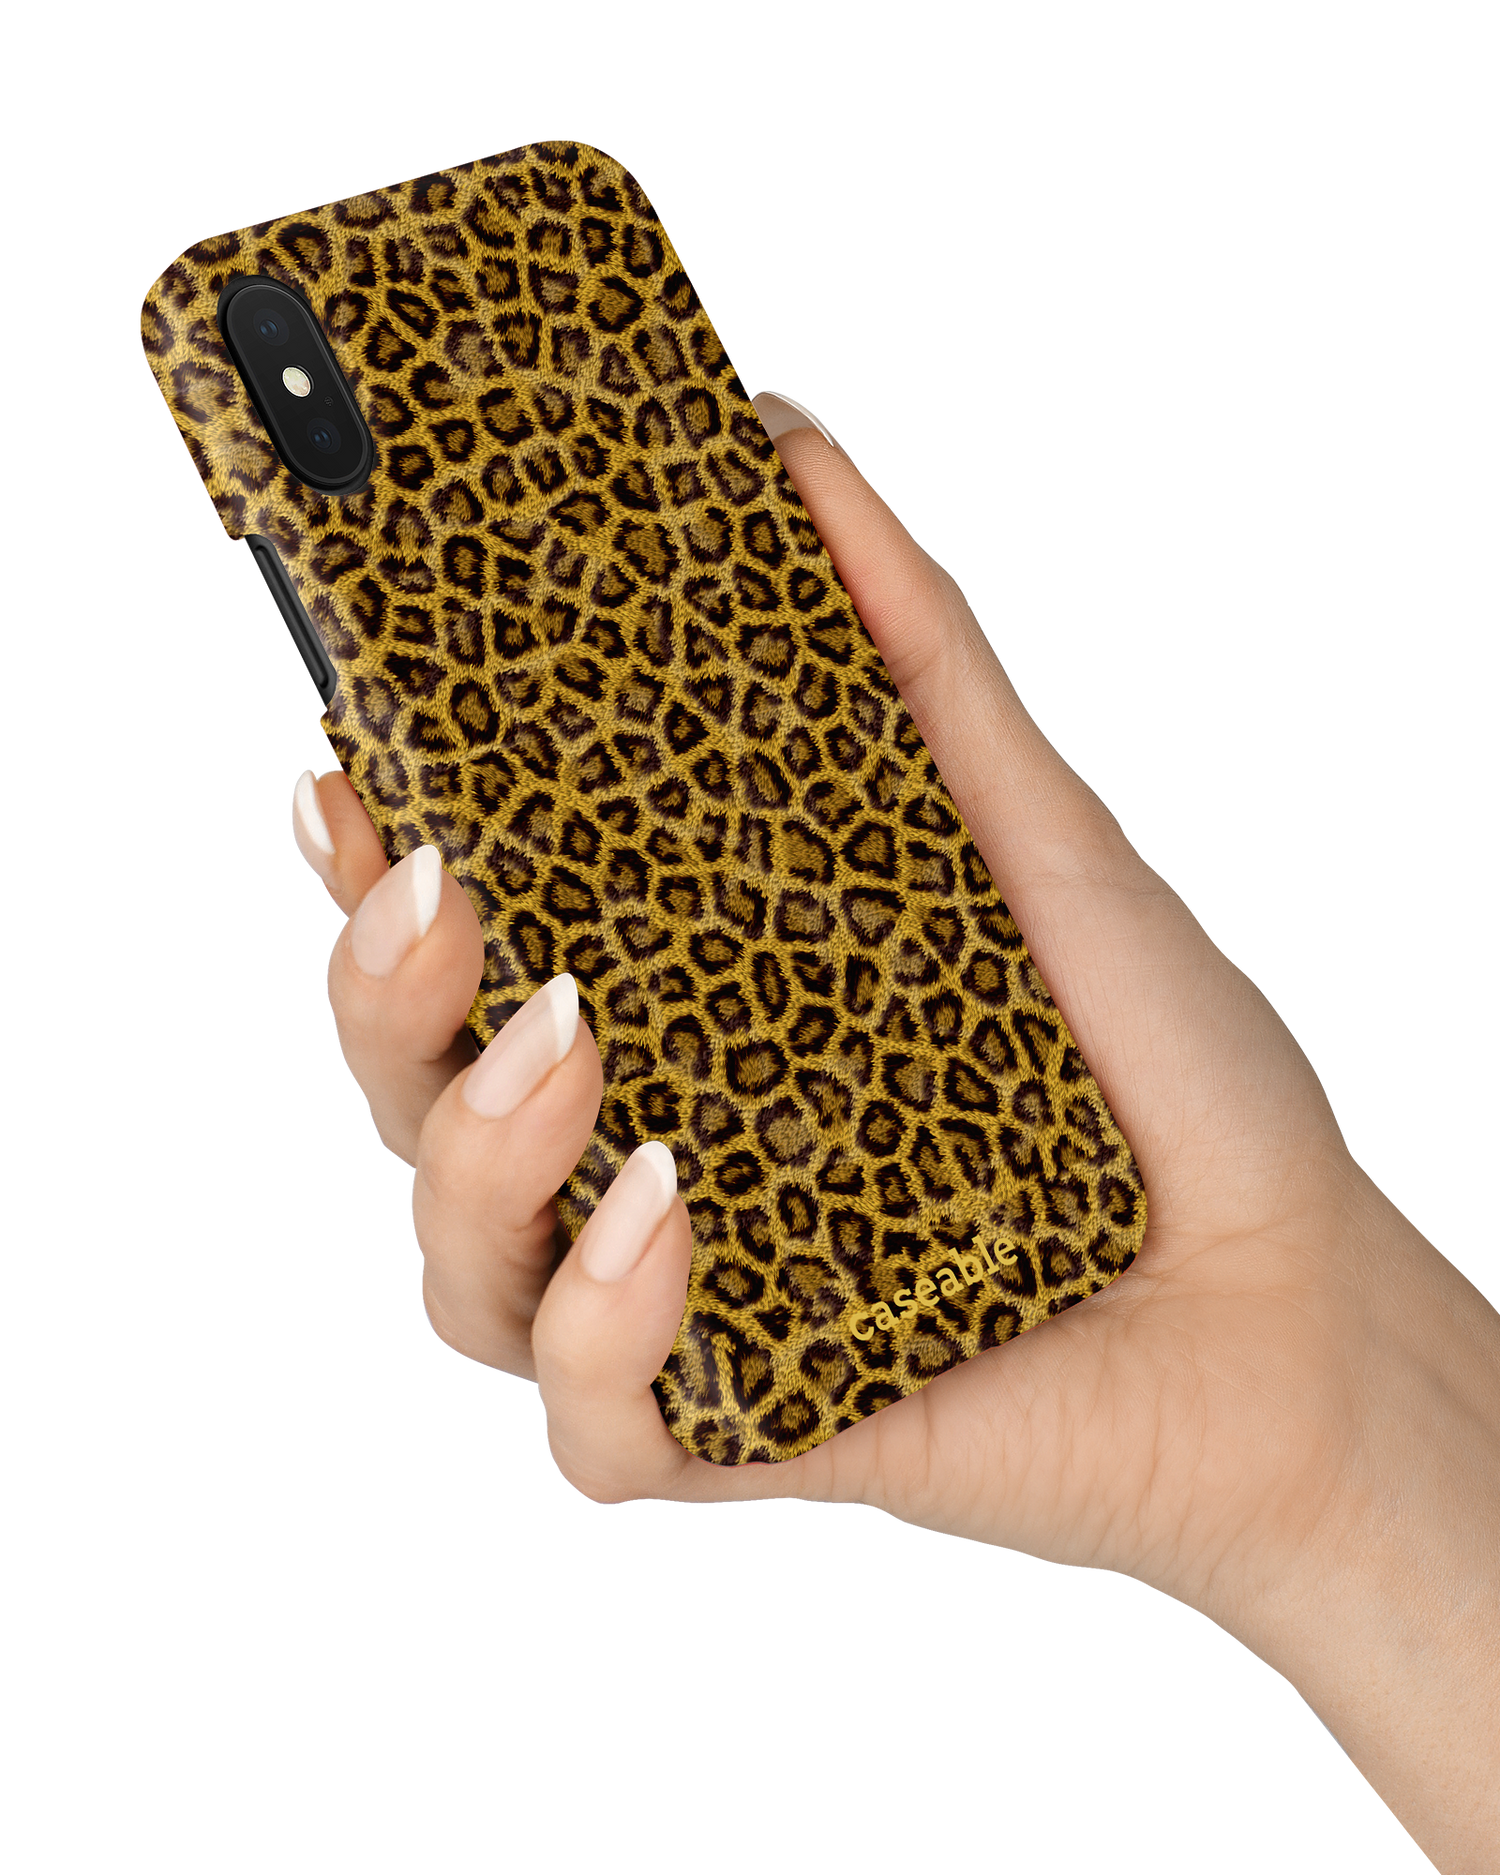 Leopard Skin Hard Shell Phone Case Apple iPhone X, Apple iPhone XS held in hand